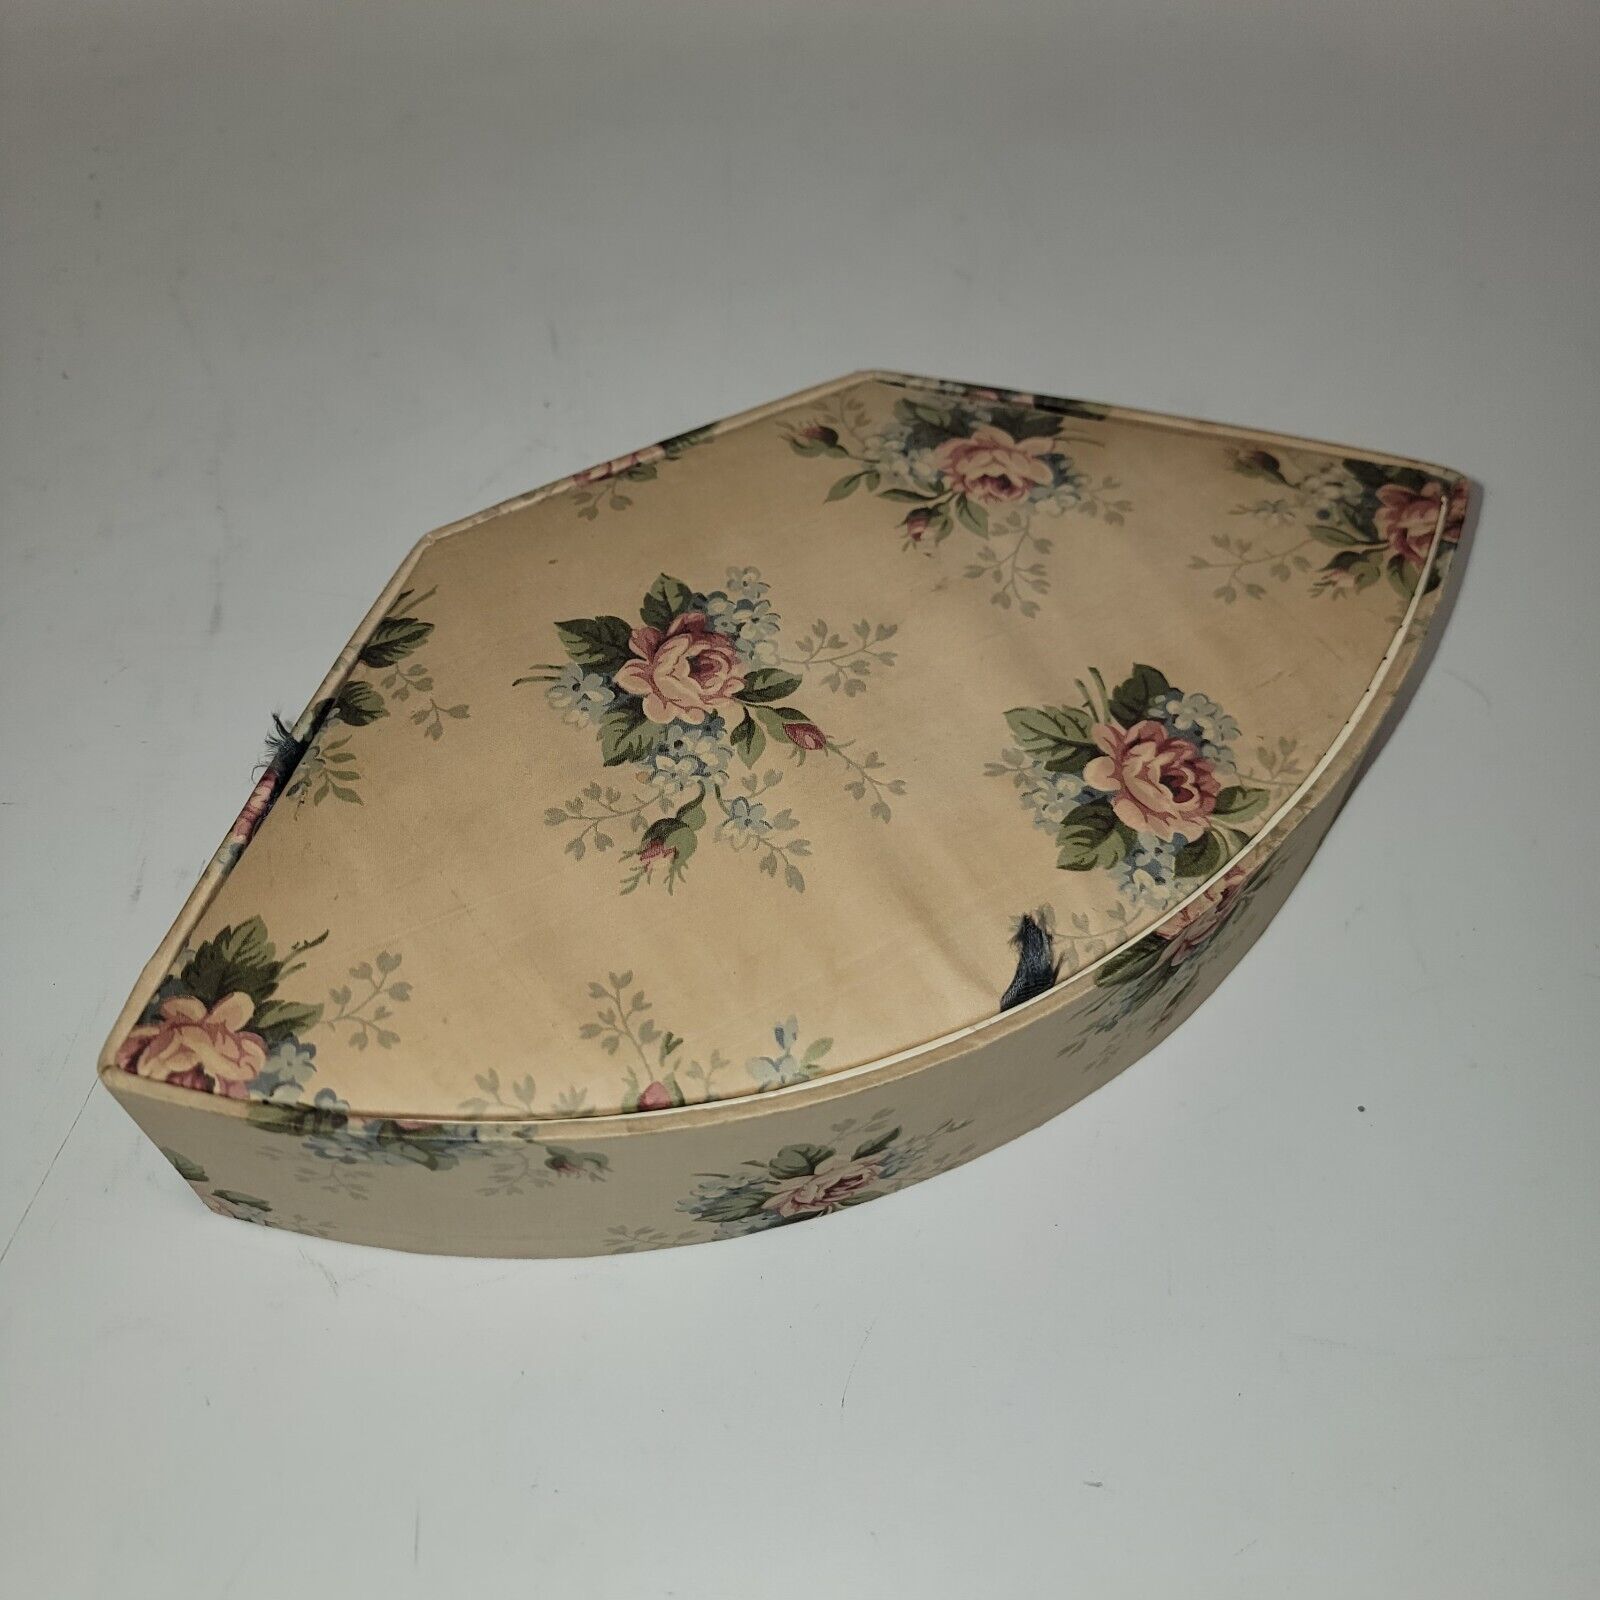 Vintage Floral Patterned Sewing Trinket Box with Vintage Contents Thread 1950s 